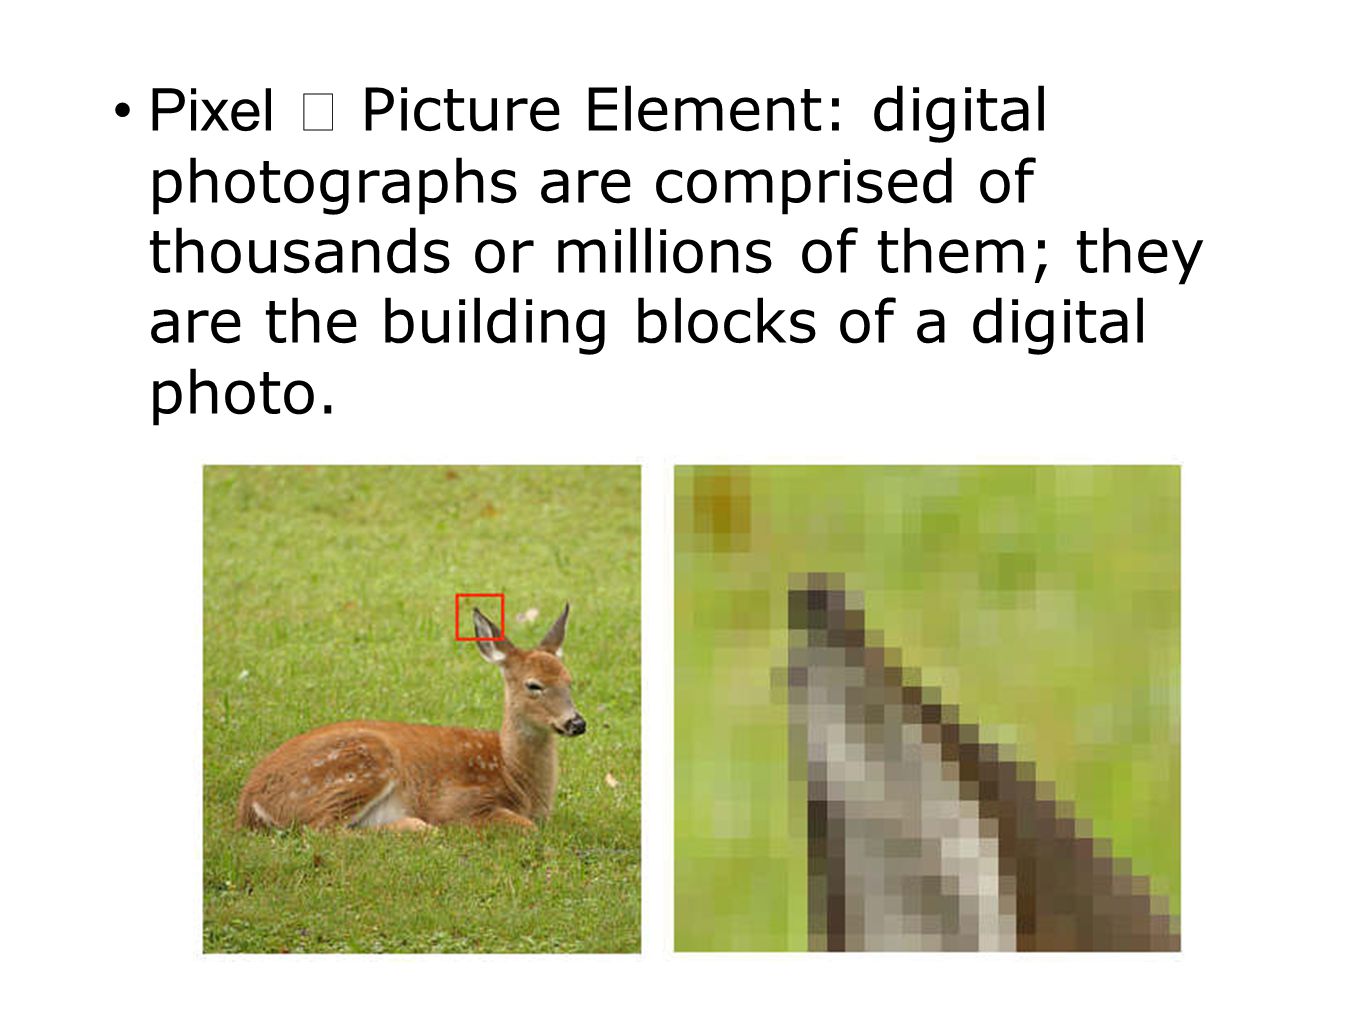 Pixel ﾐ Picture Element: digital photographs are comprised of thousands or millions of them; they are the building blocks of a digital photo.